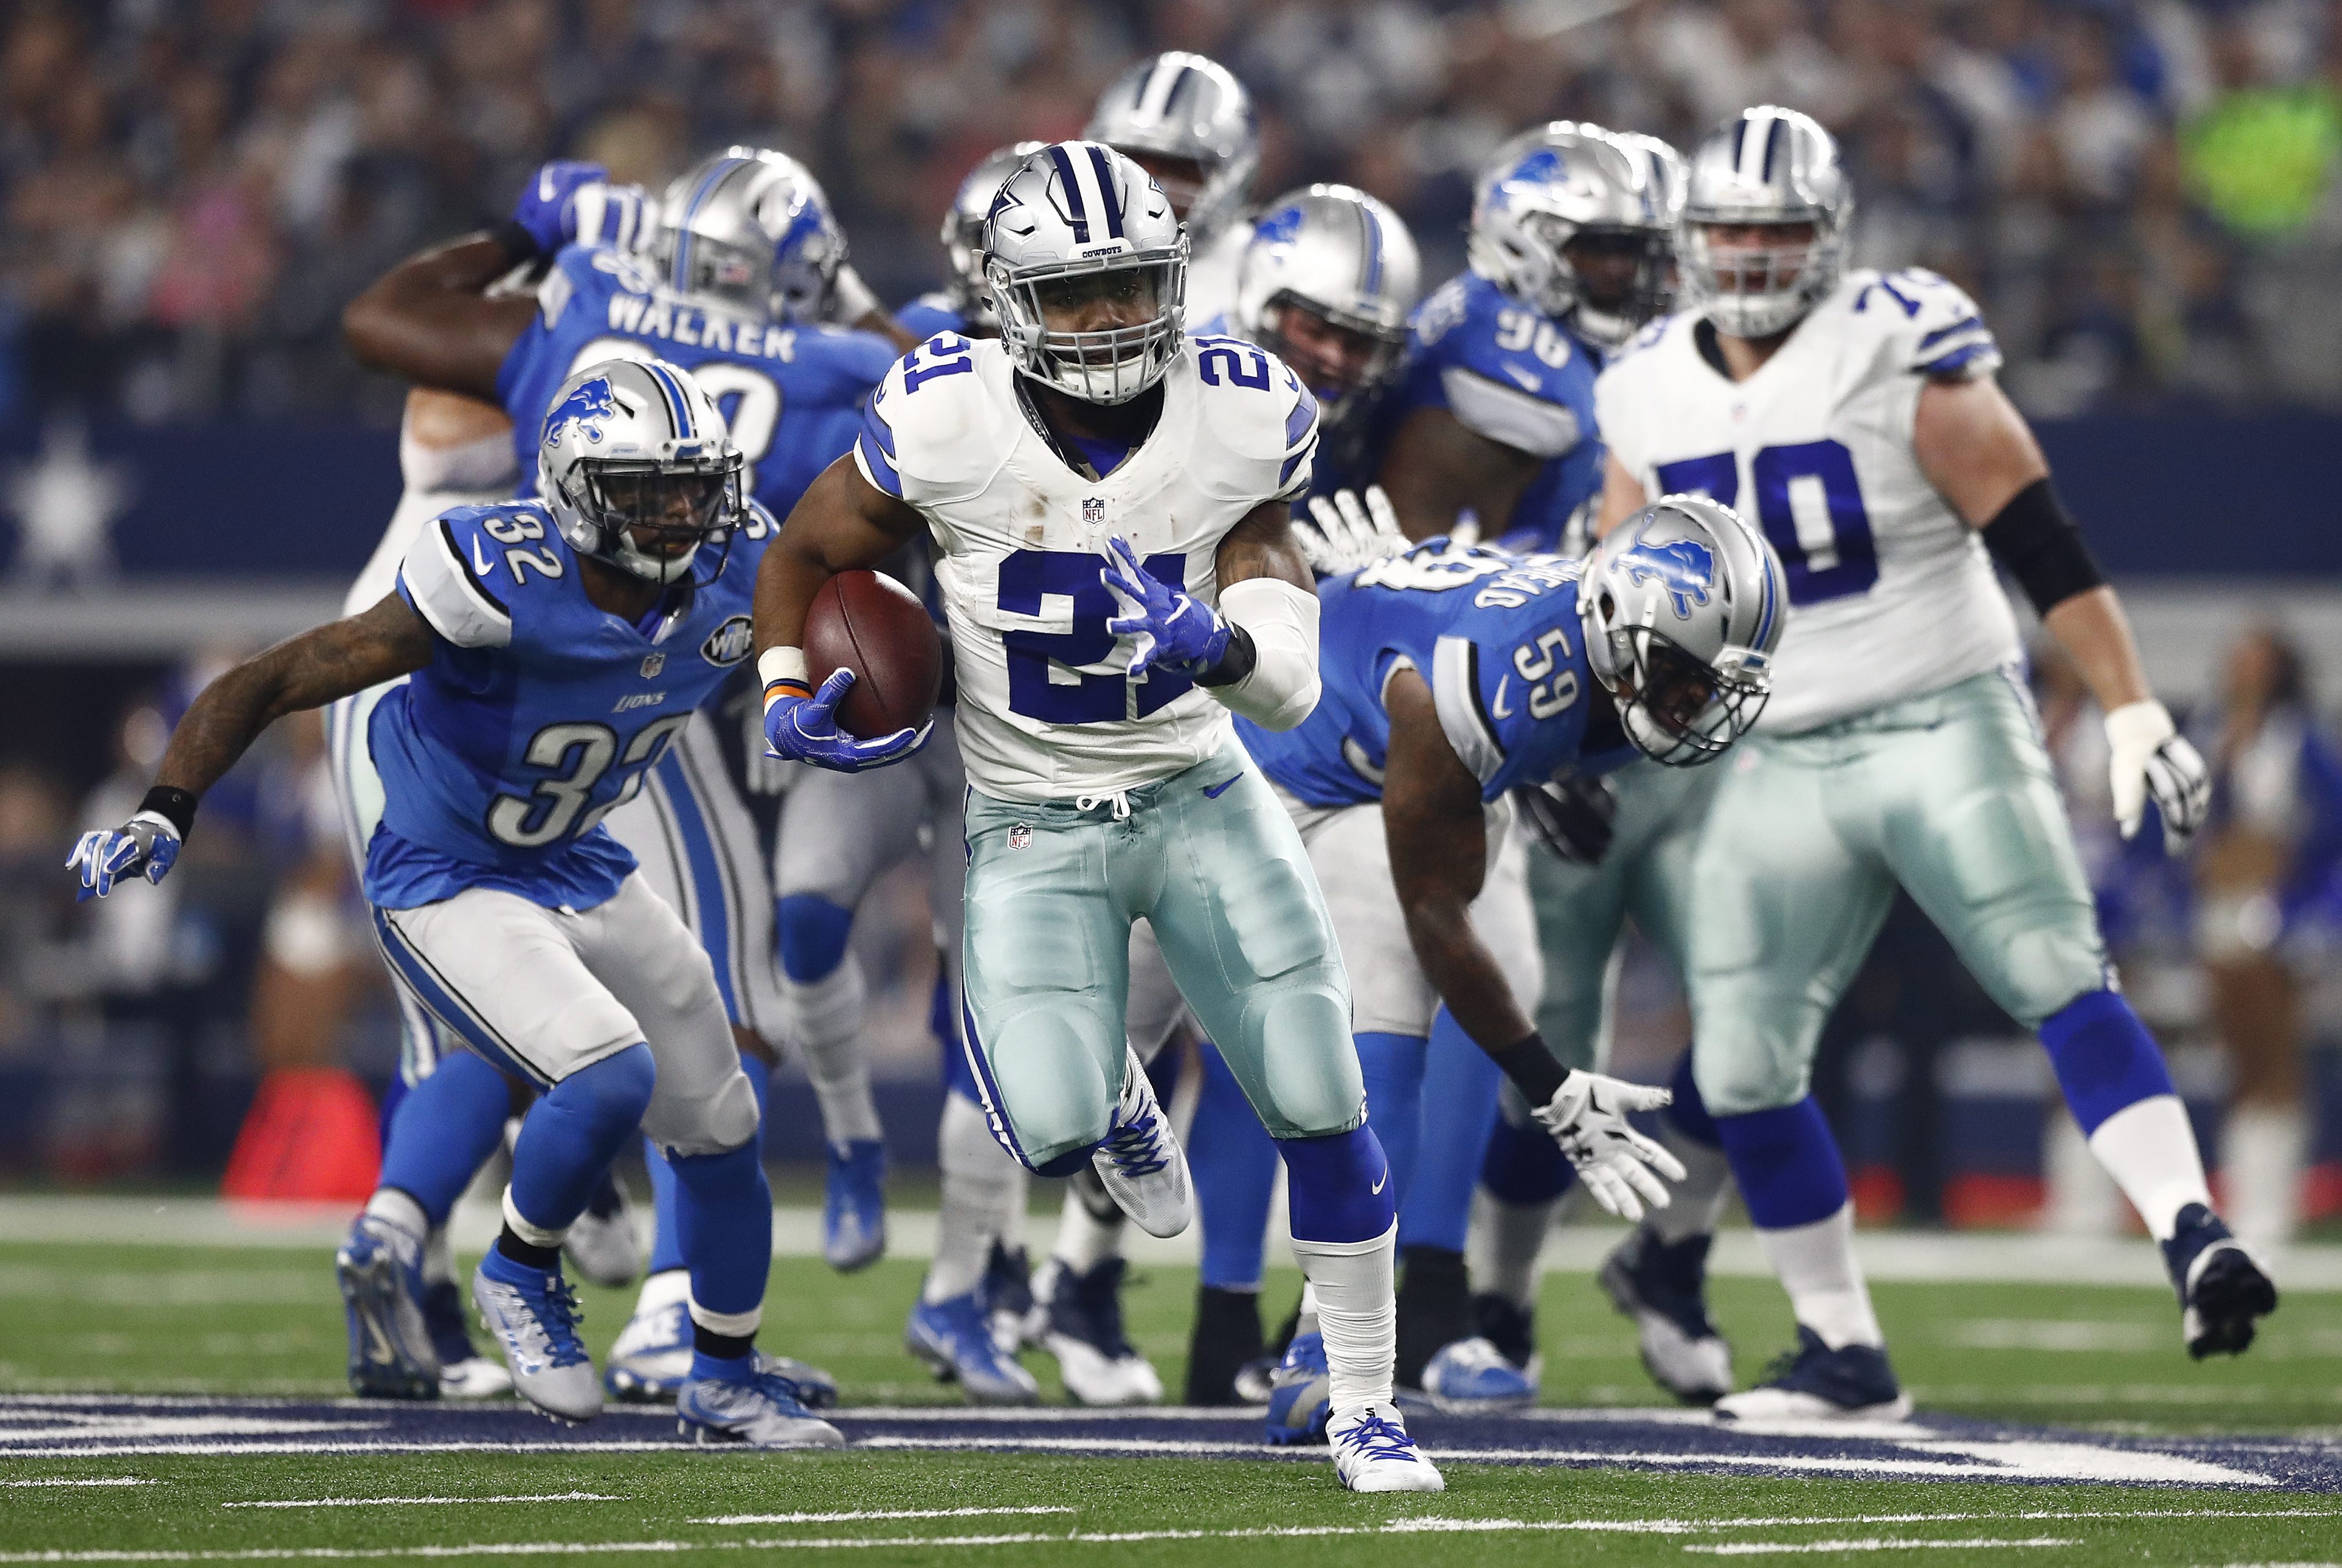 2016-12-26 07:49:01 epa05689029 Dallas Cowboys player Ezekiel Elliott (C) runs the ball for a touchdown in the first half of the NFL game between the Detroit Lions and the Dallas Cowboys in Arlington, Texas, USA, 26 December 2016. EPA/LARRY W. SMITH